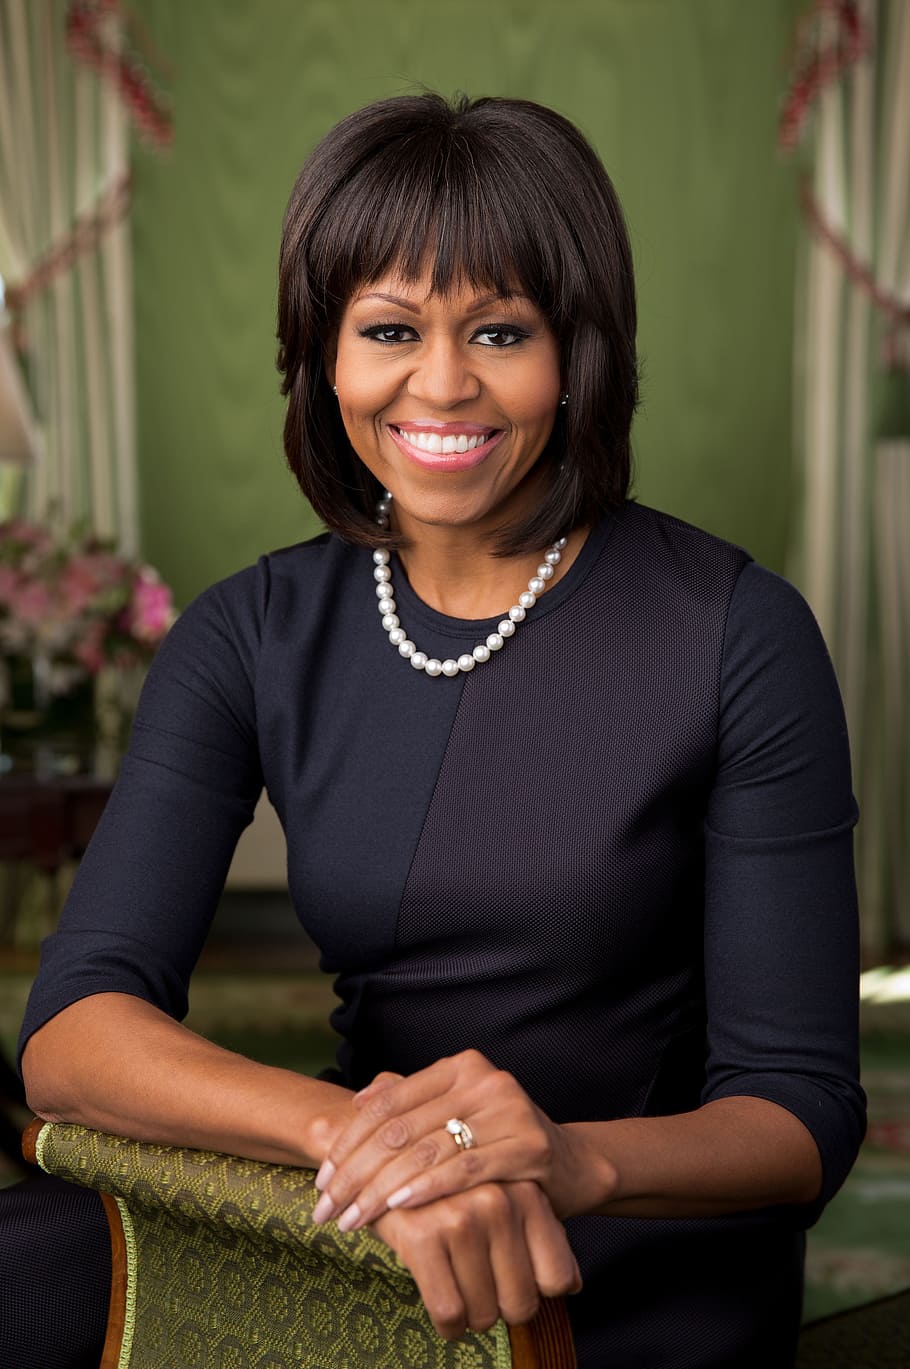 michelle obama, 2013, official portrait, wife of the president of the united states, first lady, african-american, green room white house, barack hussein obama, woman, smiling